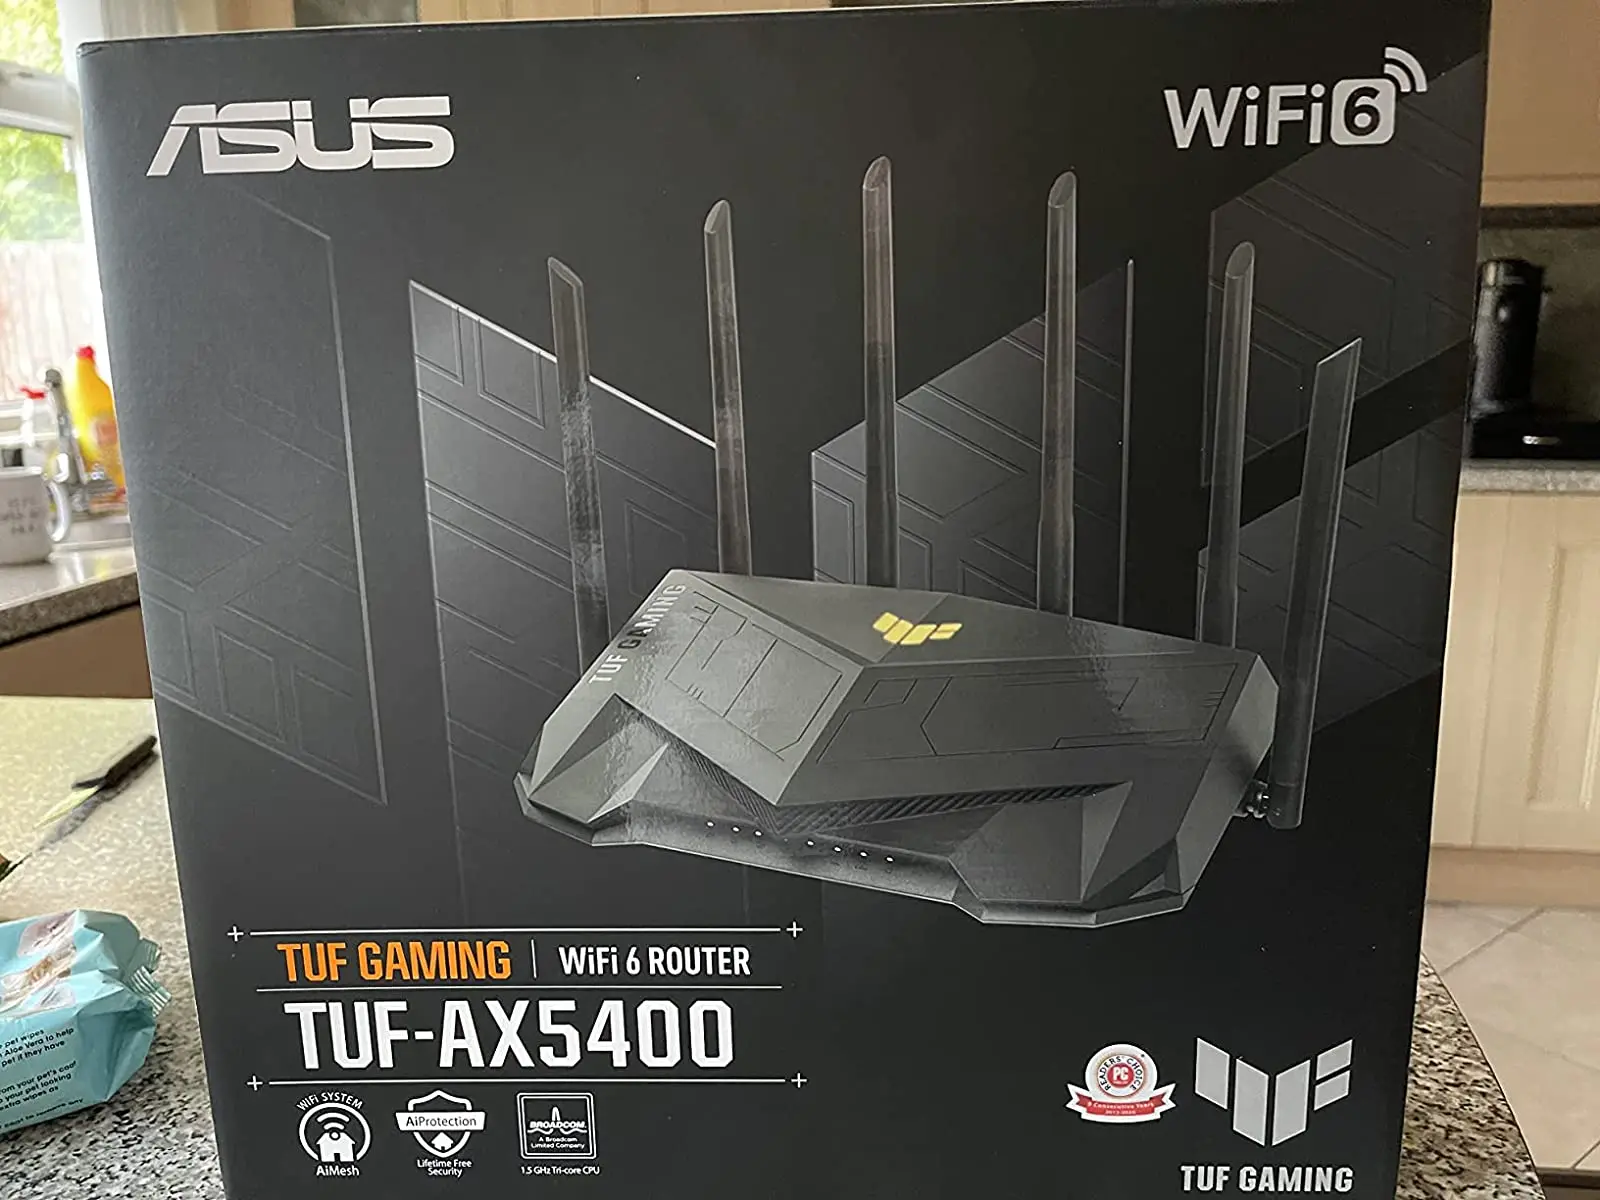 ASUS TUF Gaming Dual Band WiFi 6 Router, WiFi 6 802.11ax, Mobile Game Mode,Mesh WiFi support, Gaming Port, Gear Accelerator images - 6